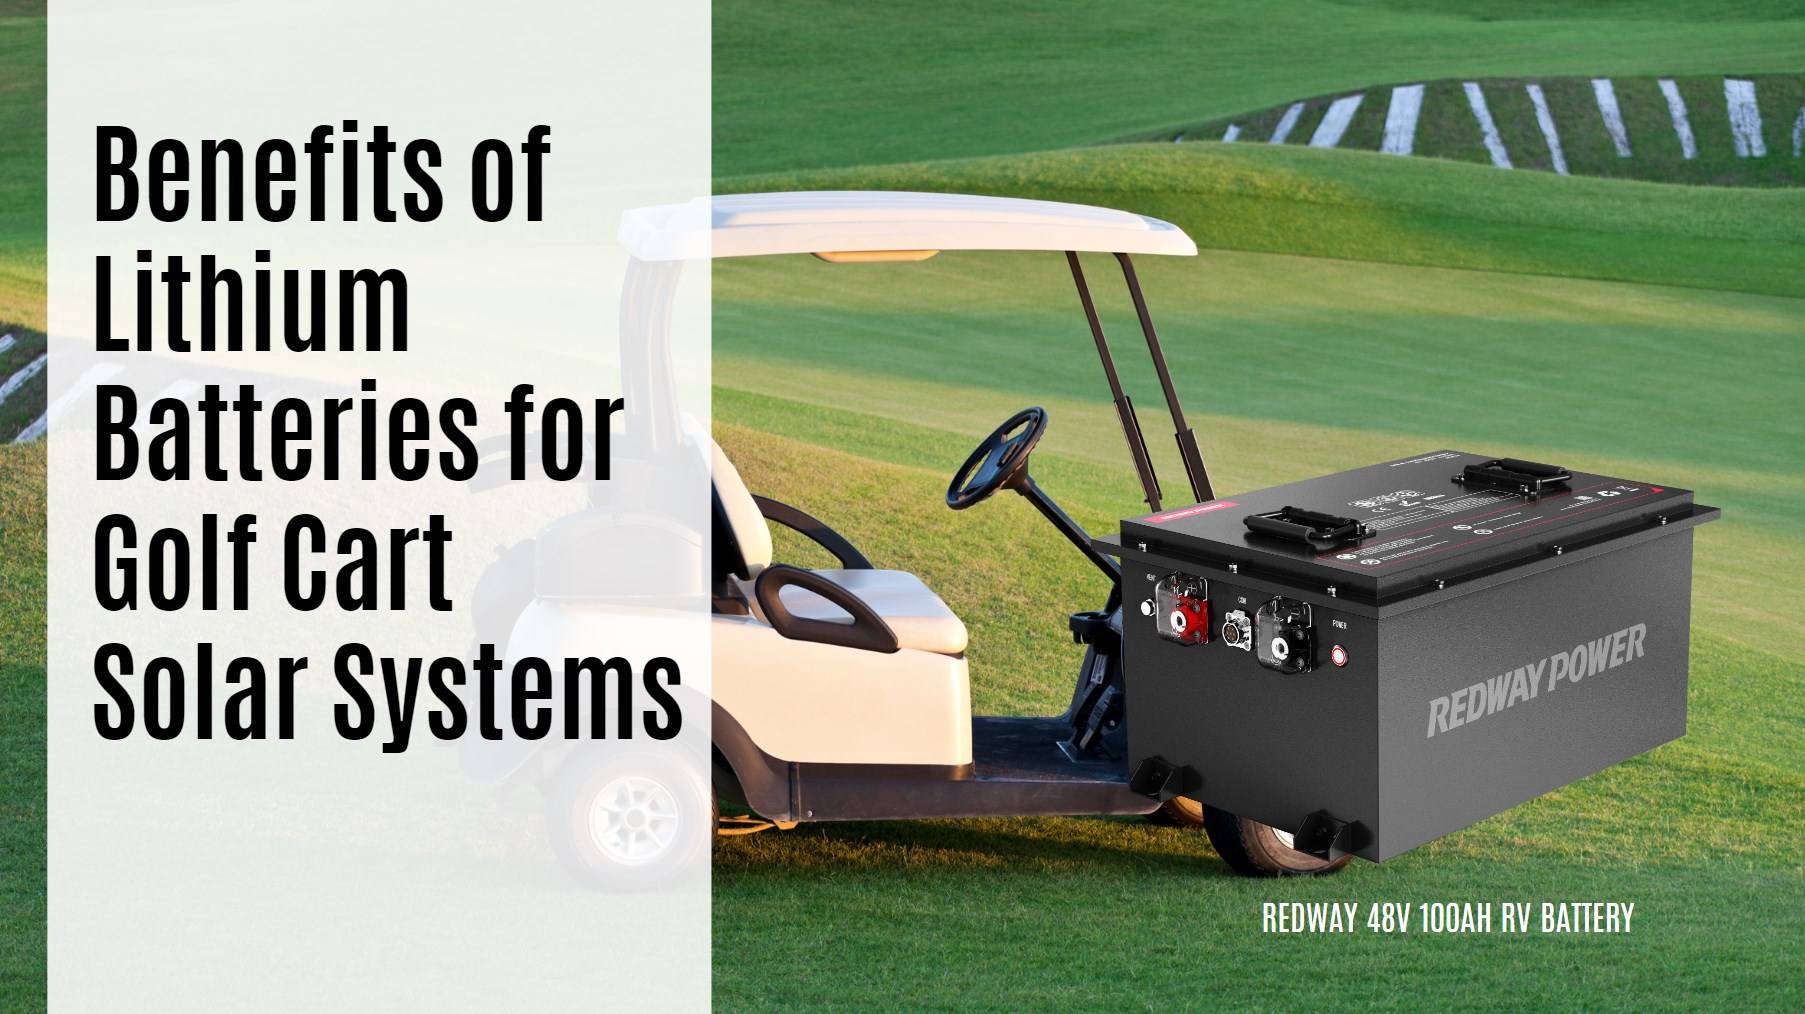 Benefits of Lithium Batteries for Golf Cart Solar Systems